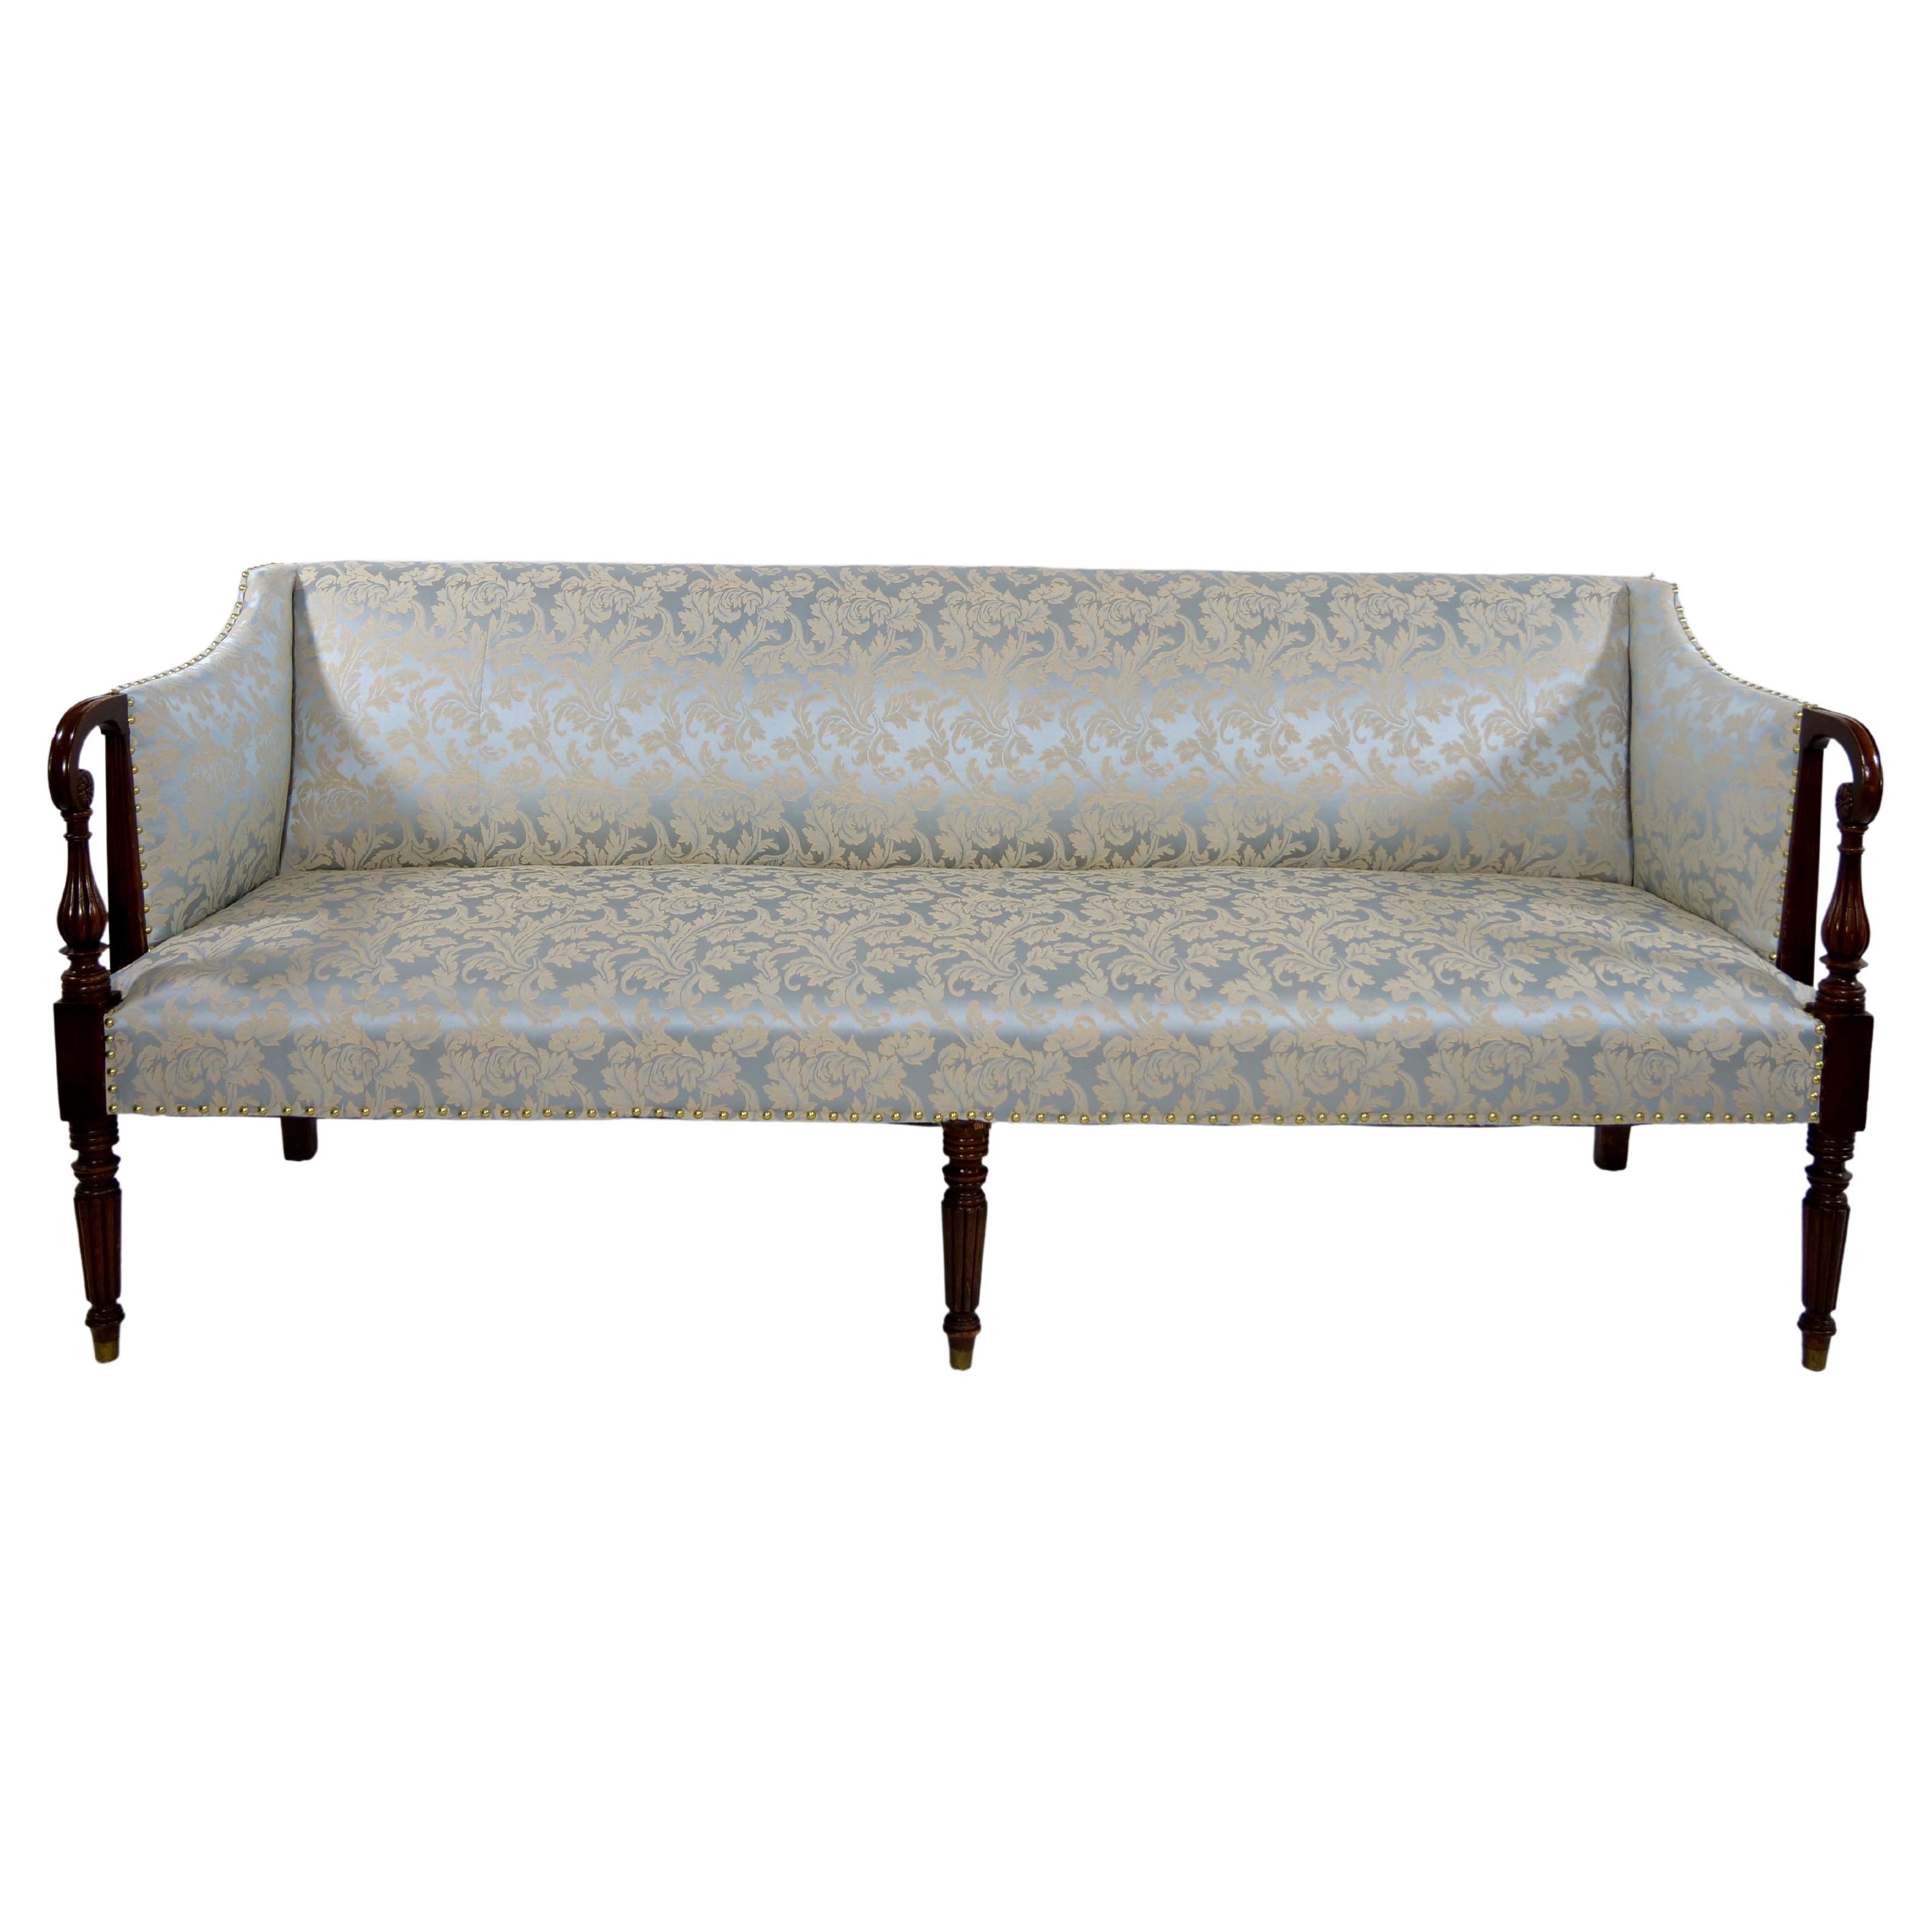 Exquisite mid 19th century mahogany wood framed Federal Sheraton style upholstered sofa. The sofa features hand carved in the Sheraton style design and upholstered side arm rest standing on five hand carved mahogany legs. The sofa is in great